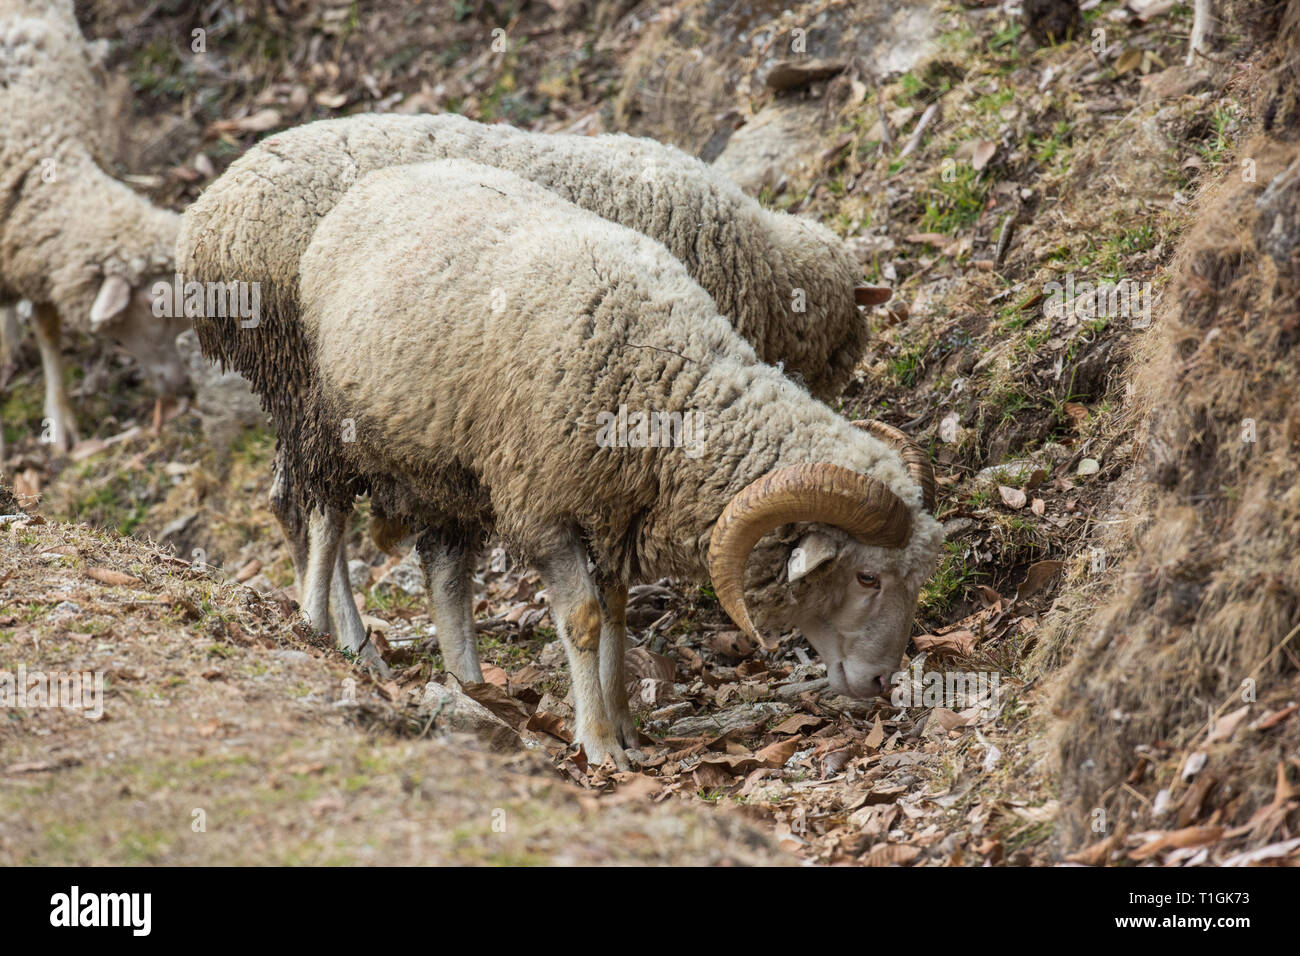 Domestic Sheep (Ovis aries). A mountain breed, one of a flock, a horned ram, trying its best to find some green vegetation upon which to graze, on a Himalayan foothill. Winter. February. Northern India. Stock Photo